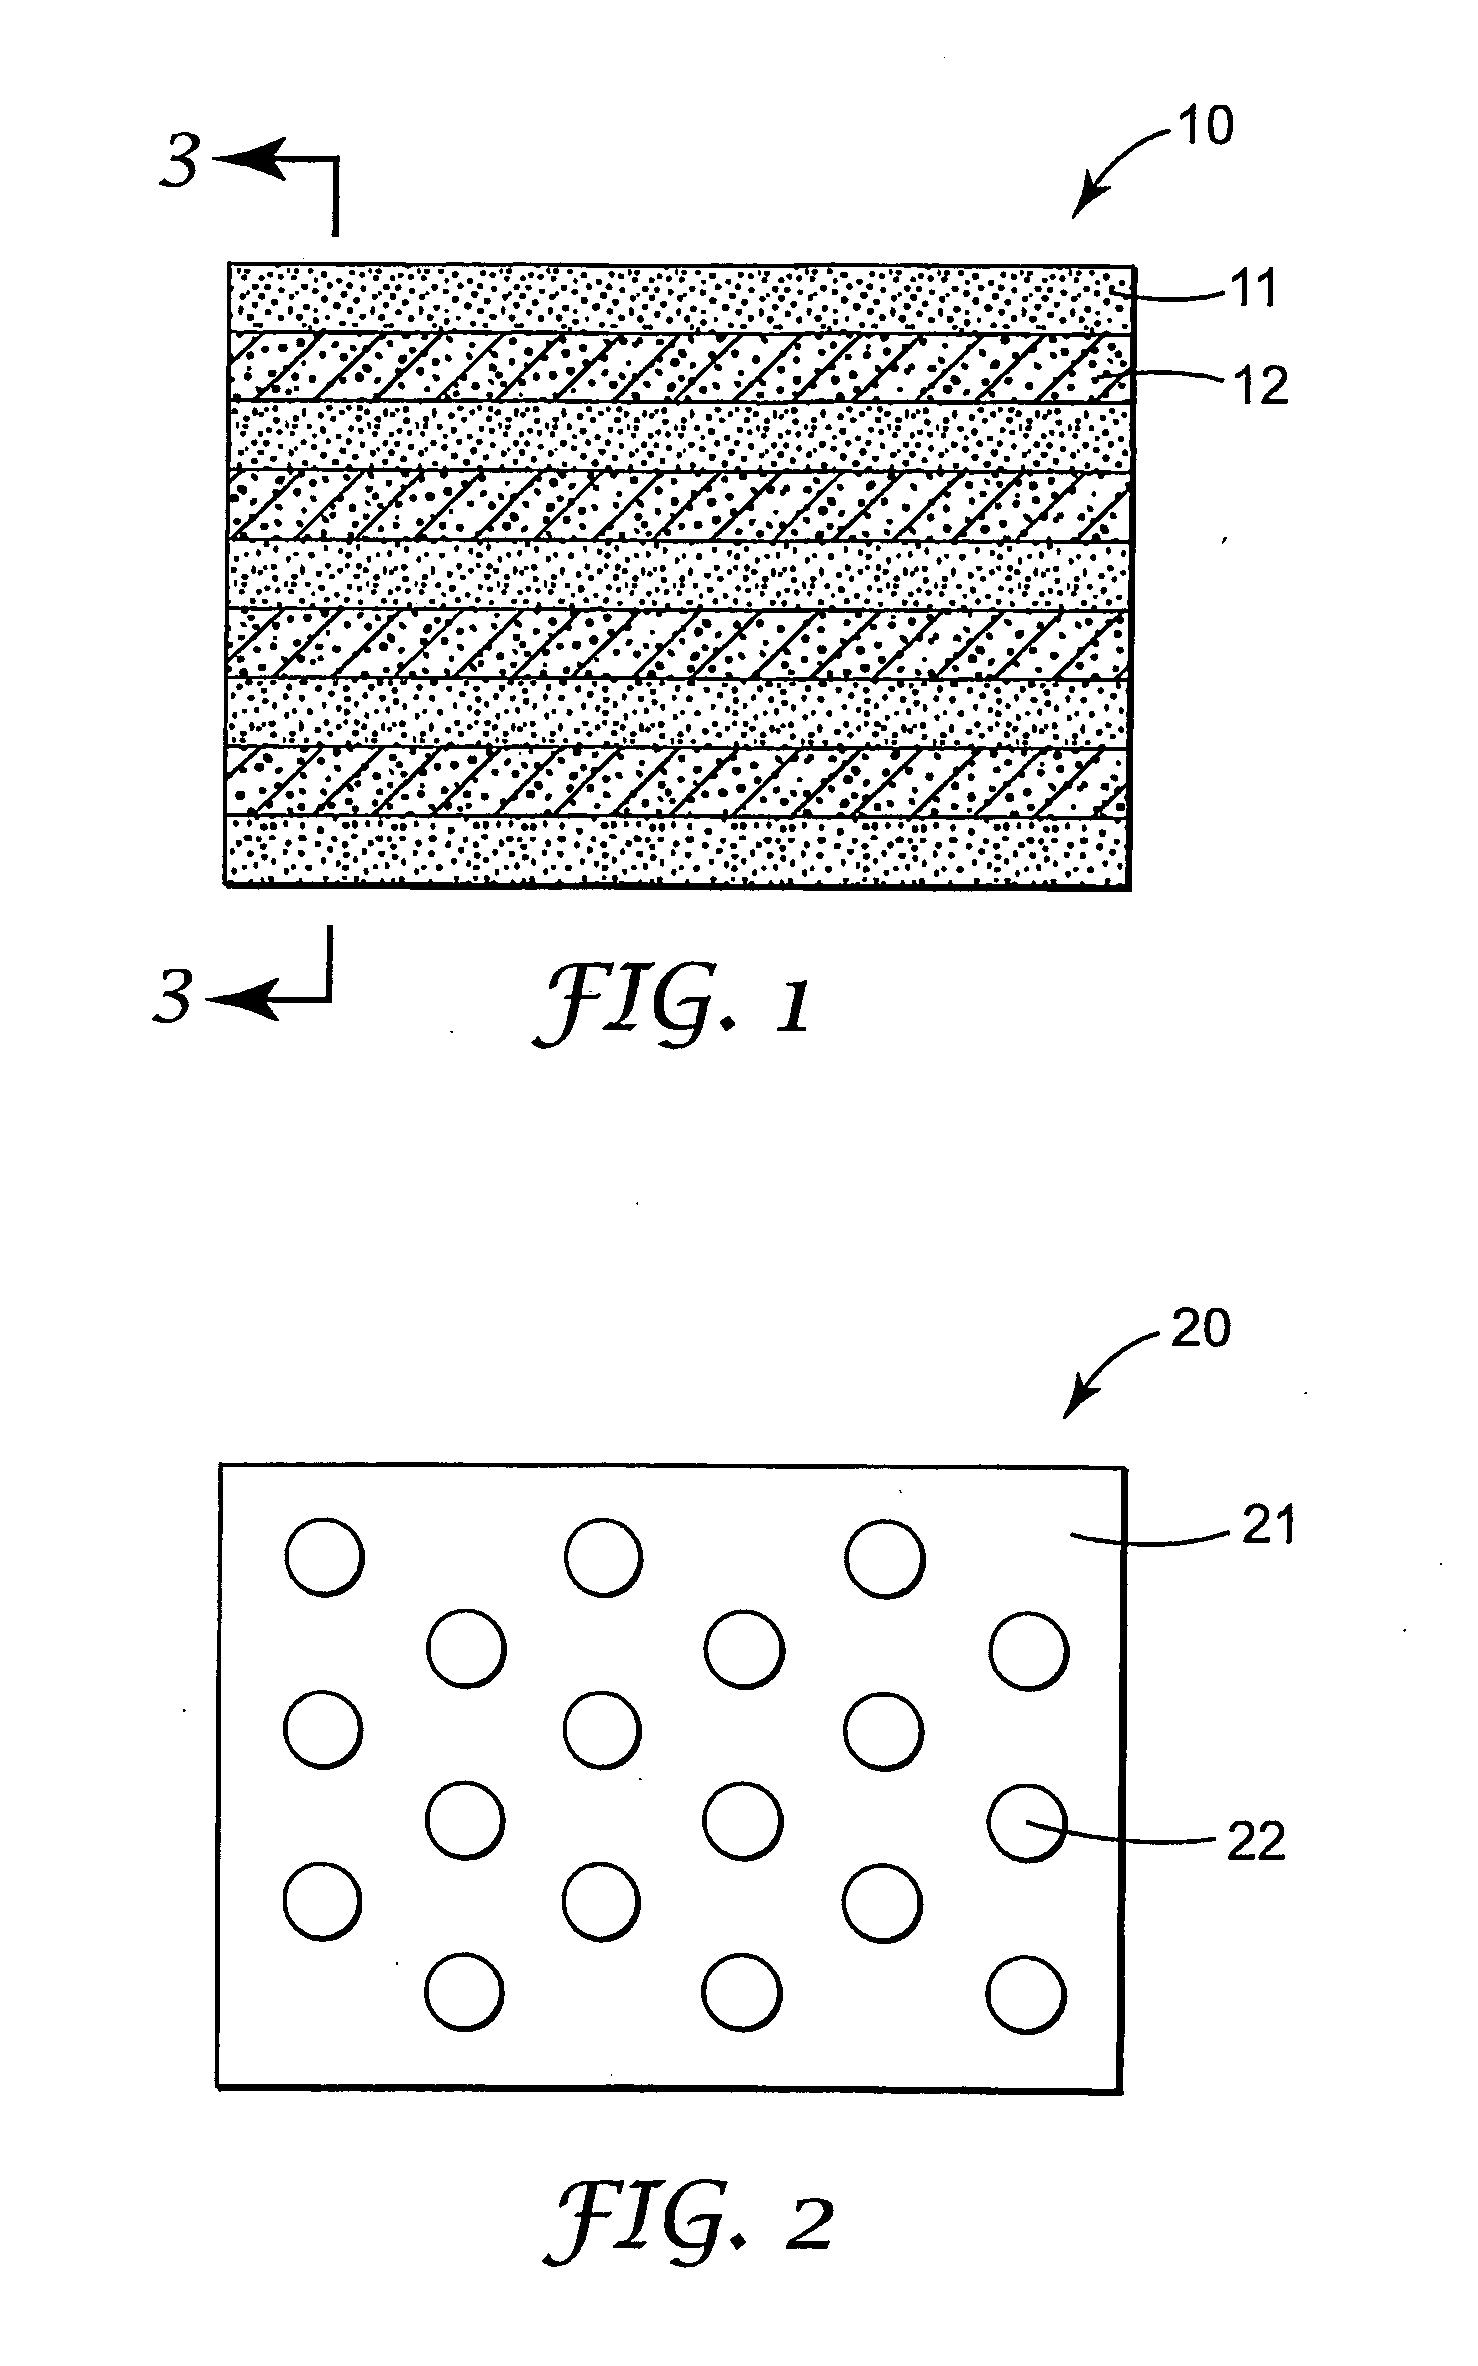 Adhesive Tape For Structural Bonding